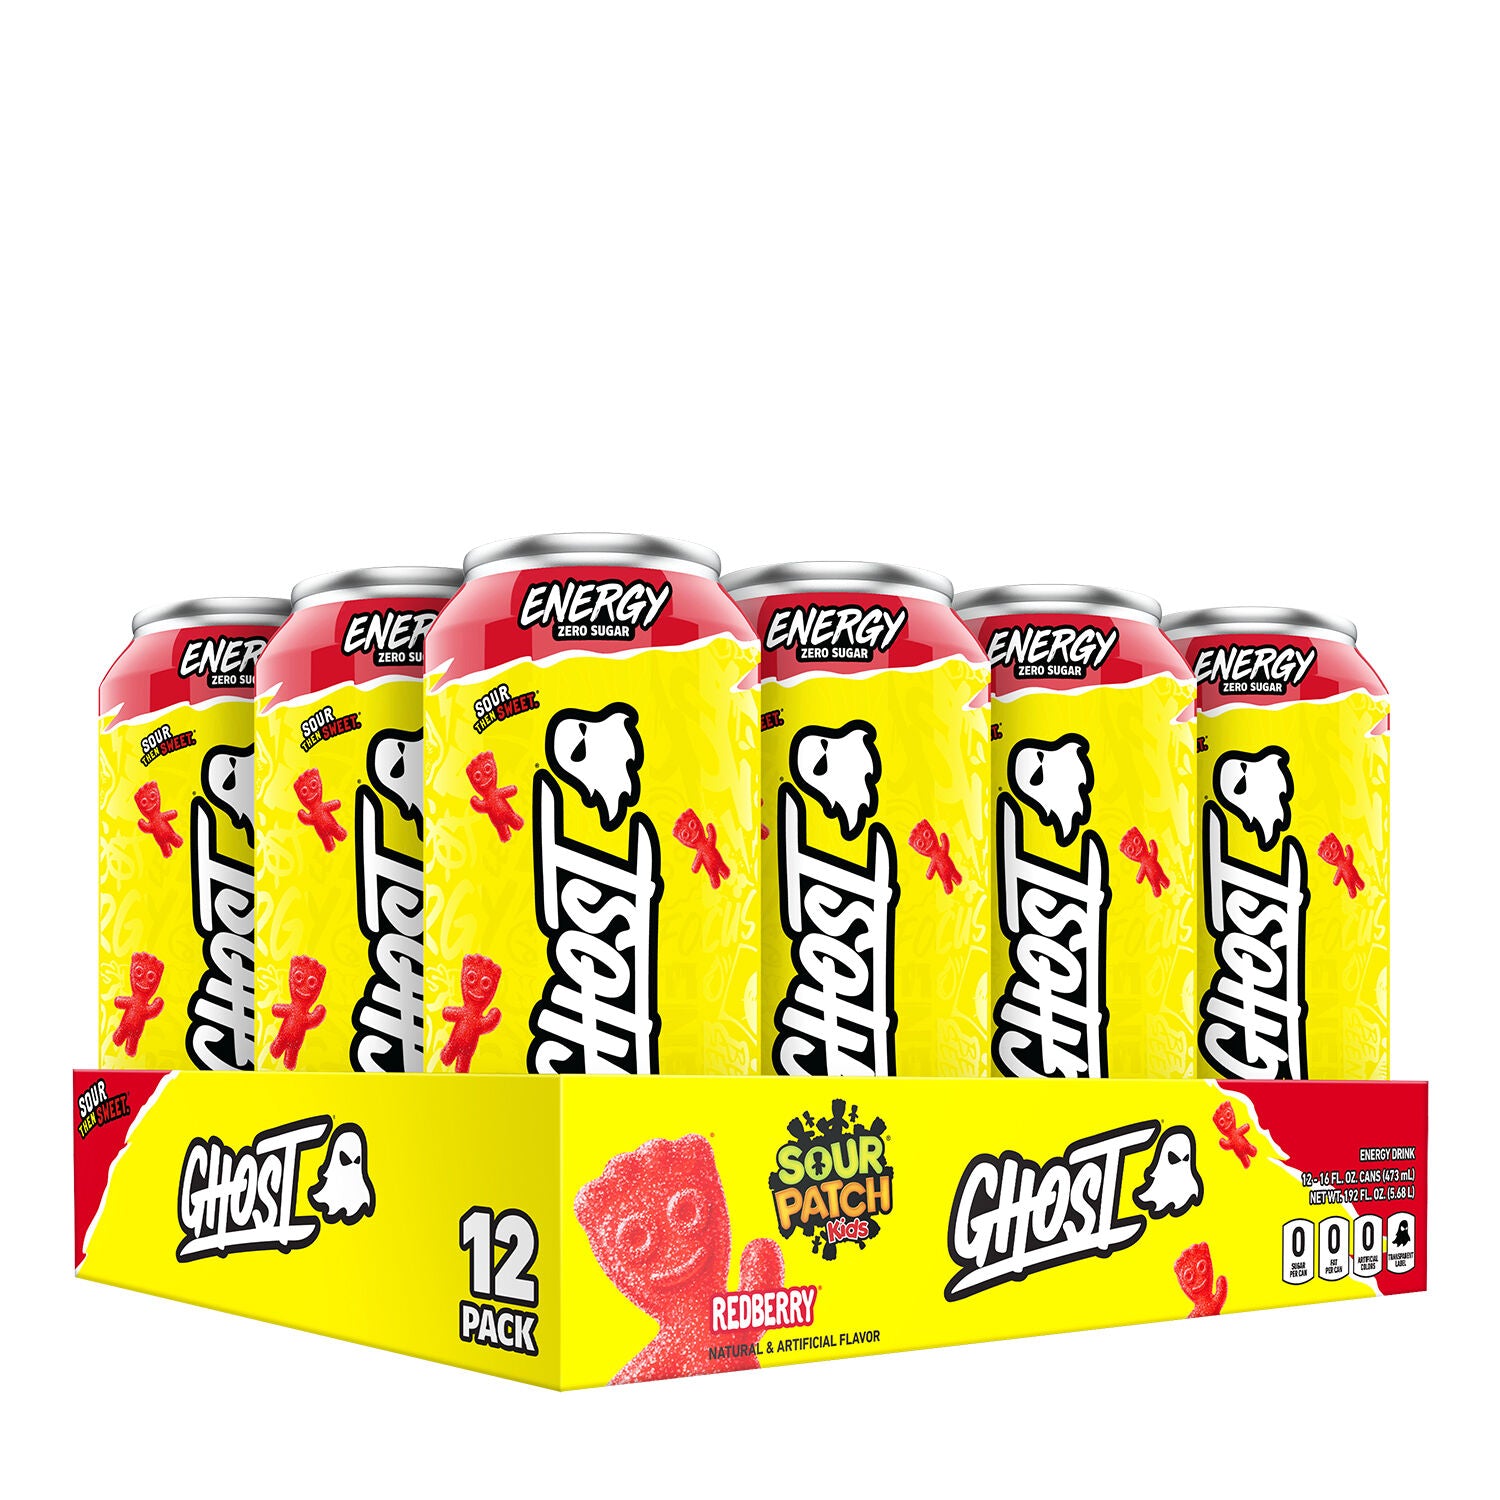 GHOST Energy Drink (1 case of 12 cans) Protein Snacks RedBerry Sour Patch Kids GHOST ghost-energy-drink-1-case-of-12-cans